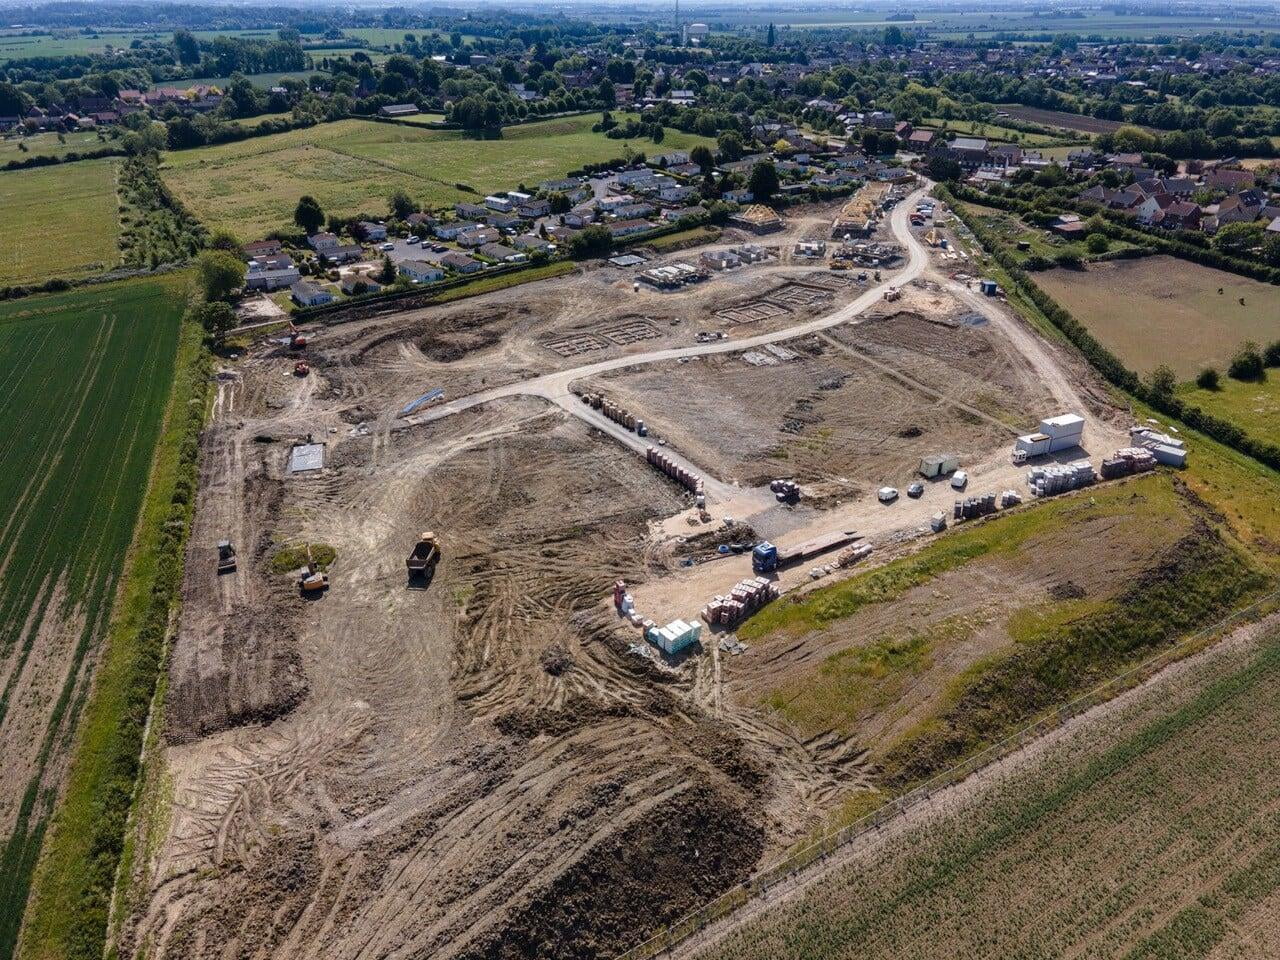 Get in touch if you are you looking to buy your next development site or want to create lasting partnerships with public and private sector landowners?